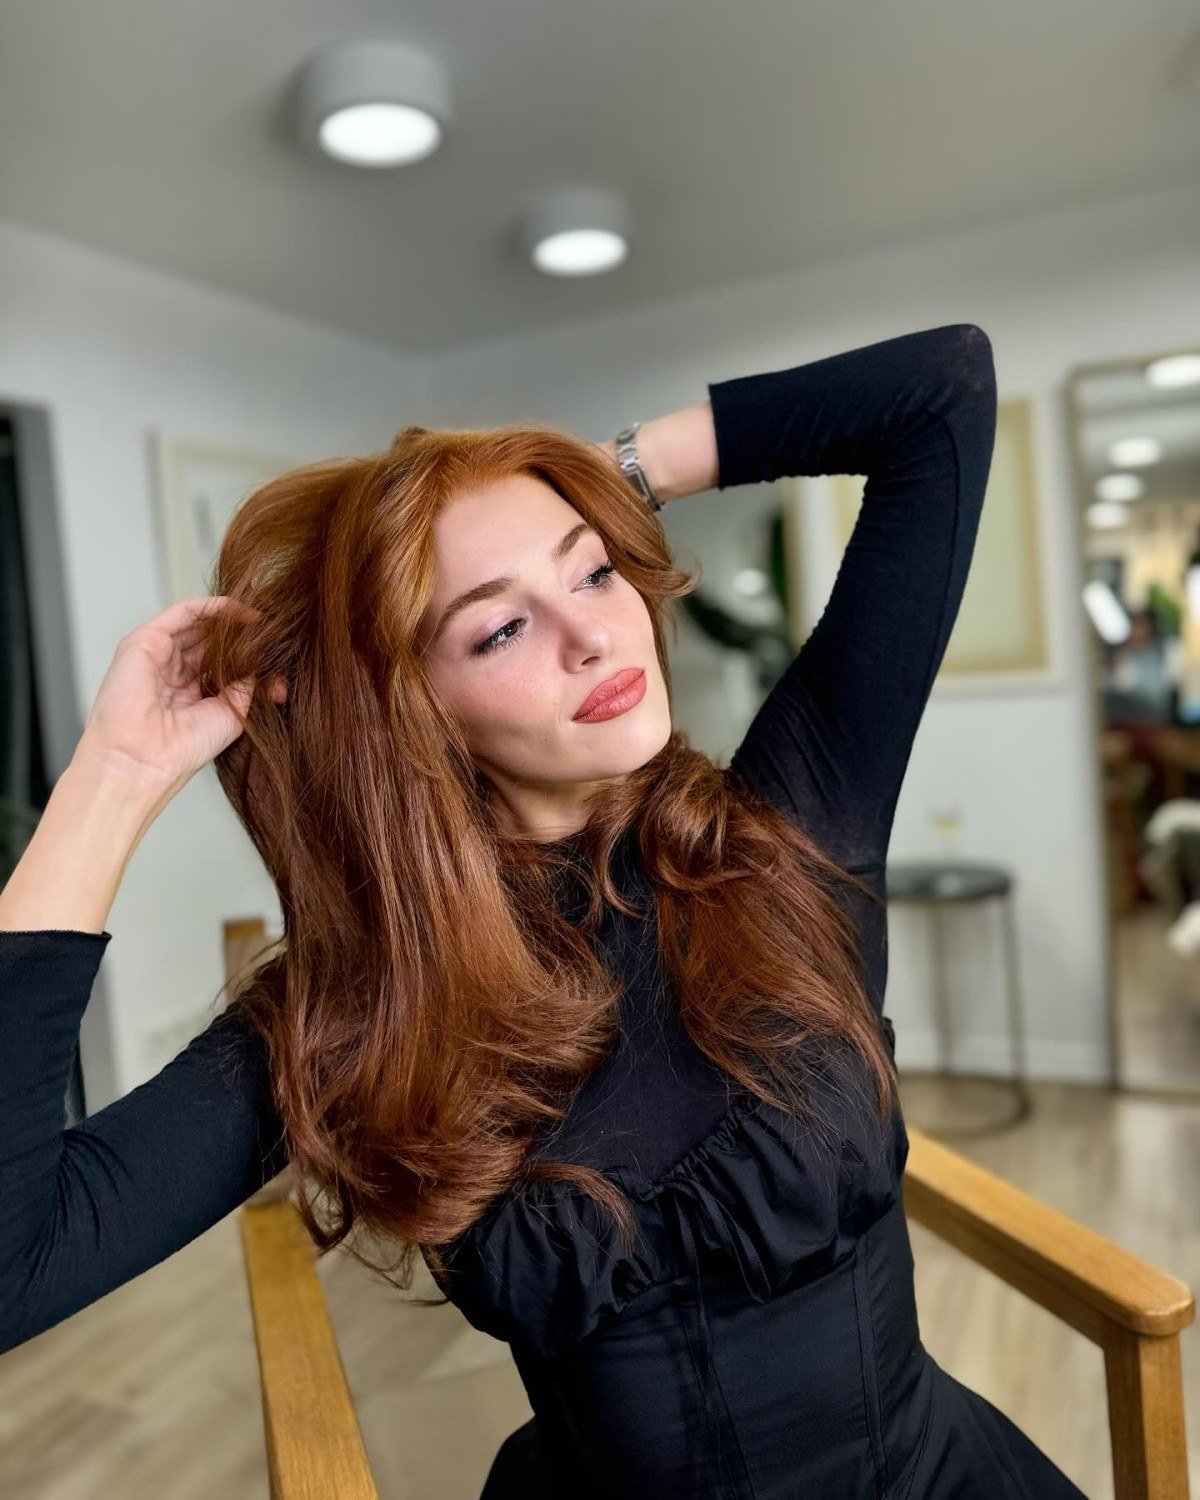 Hande Ercels Red Haired Image Controversial Posts and Social Media Reactions